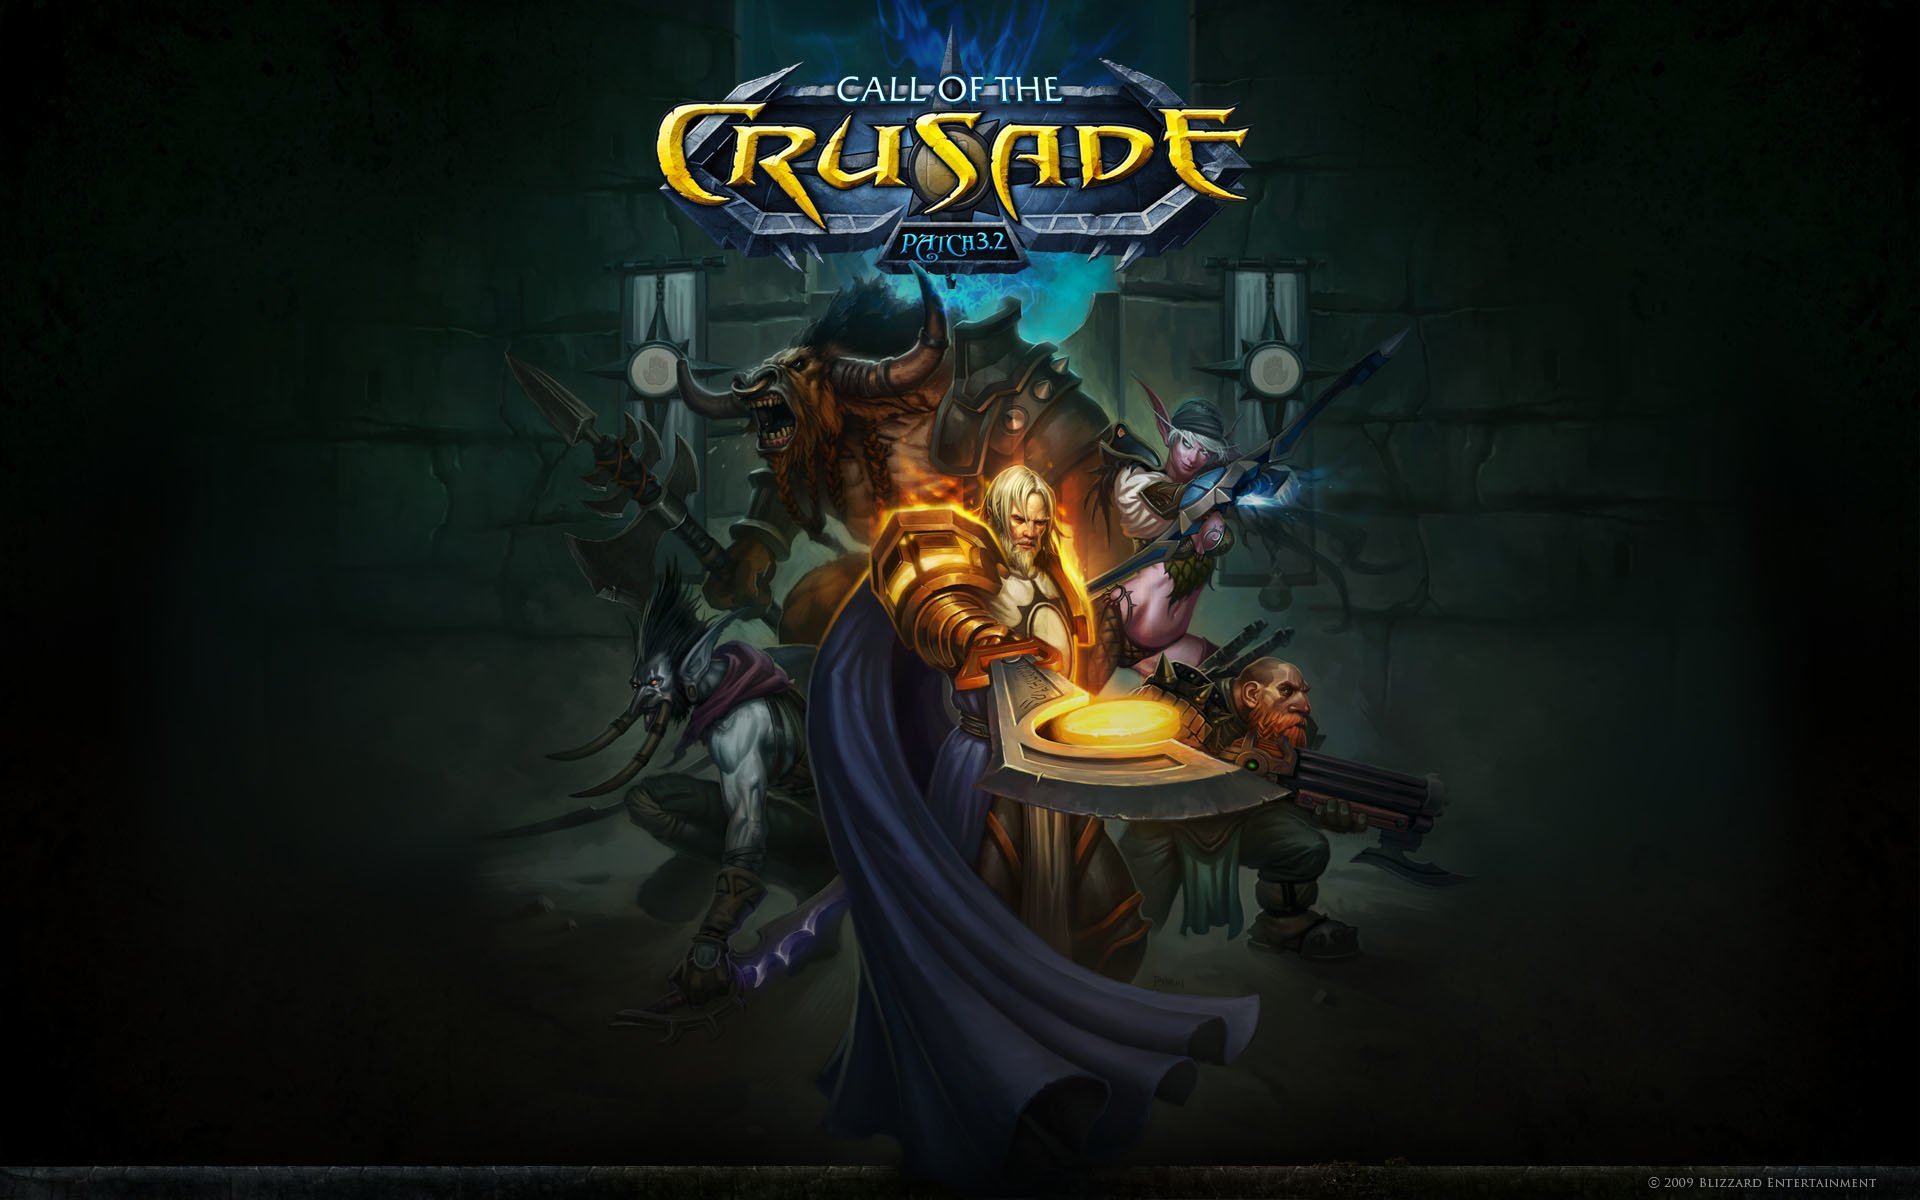 CALL OF THE CRUSADE Arrives in WOTLK Classic June 20th